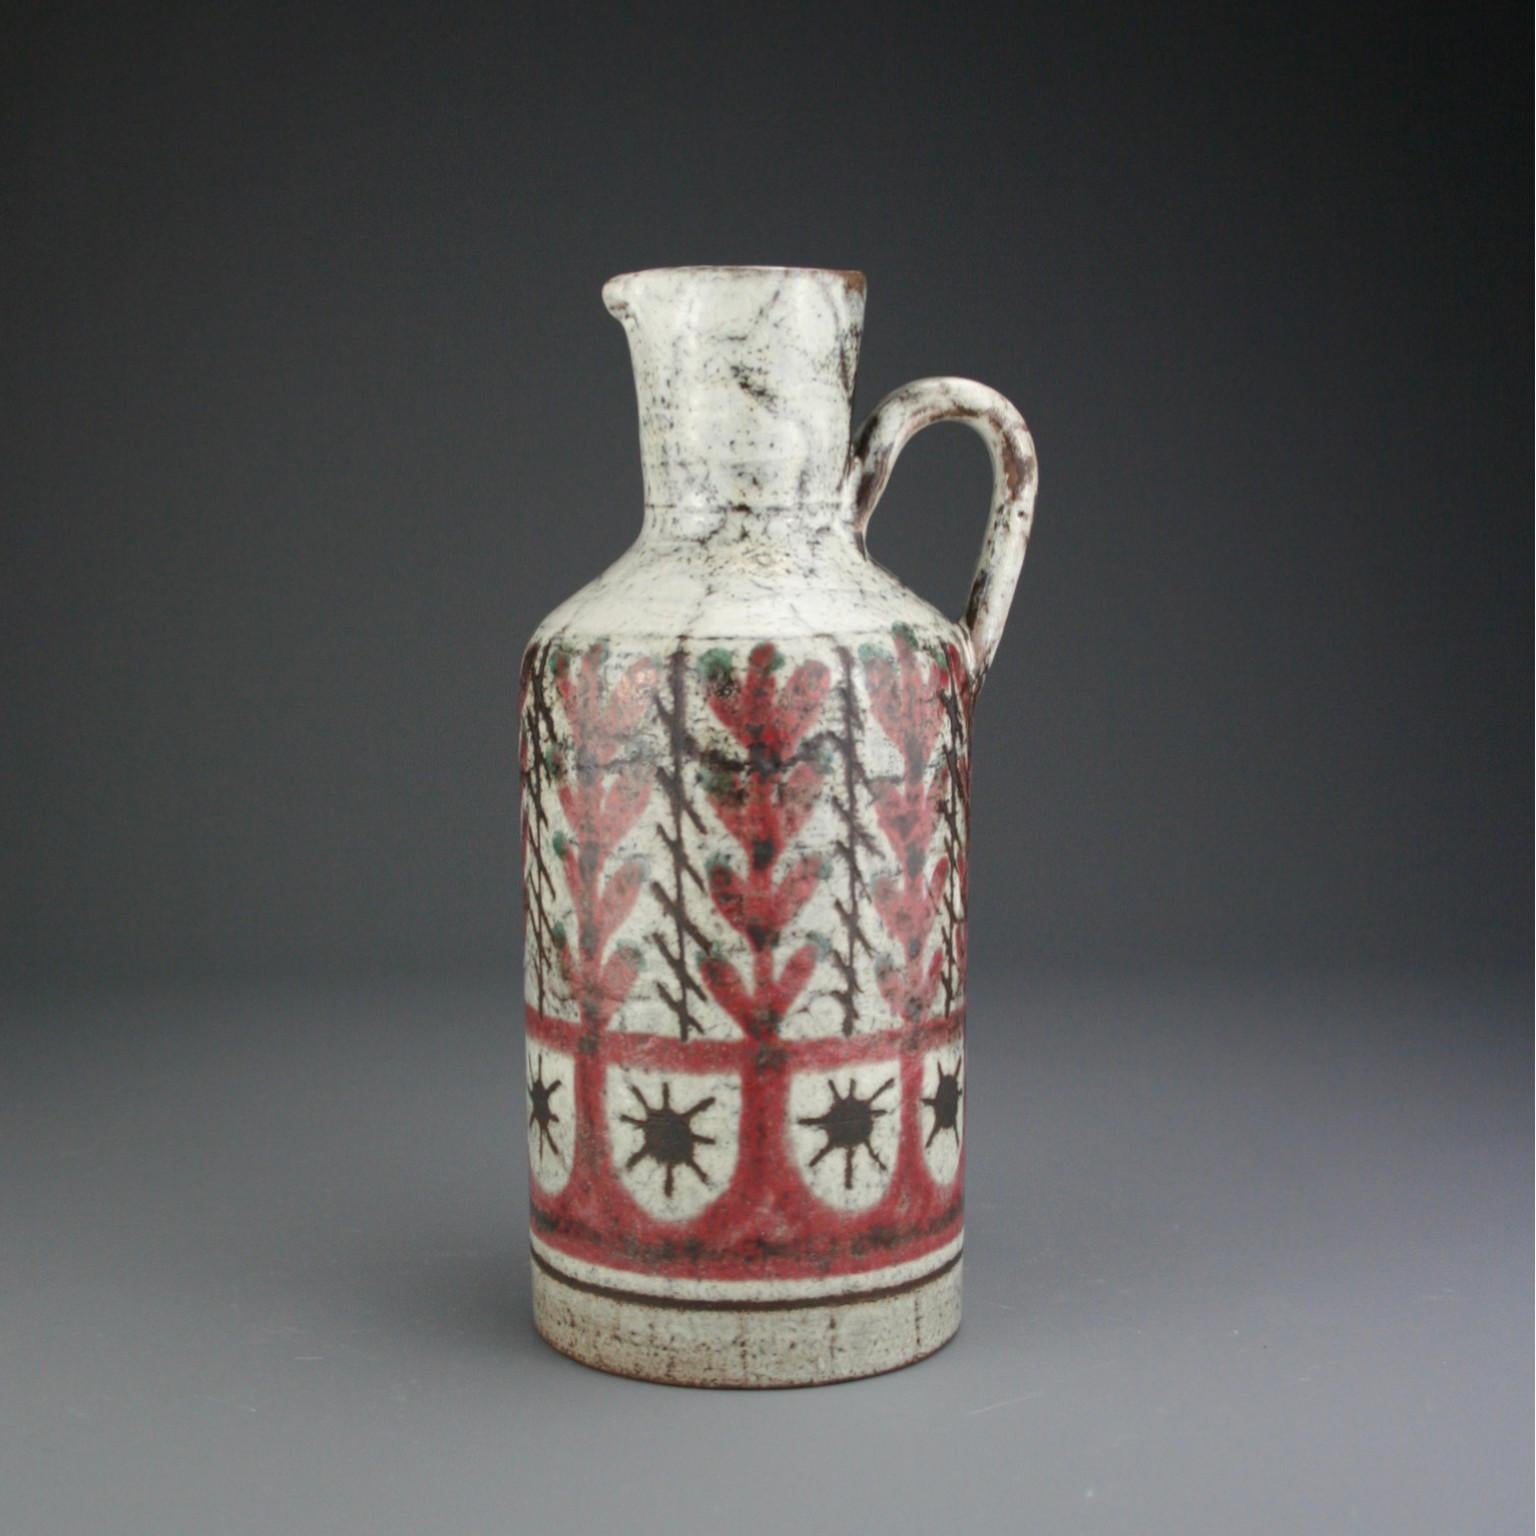 This French midcentury ceramic pitcher was handmade by Gustave Reynaud, Le Mûrier (circa 1950s). 

The pitcher is hand painted with repeating, abstract mulberry red and brown leaf motif on a delicate grey and off-white glaze base.  

About the